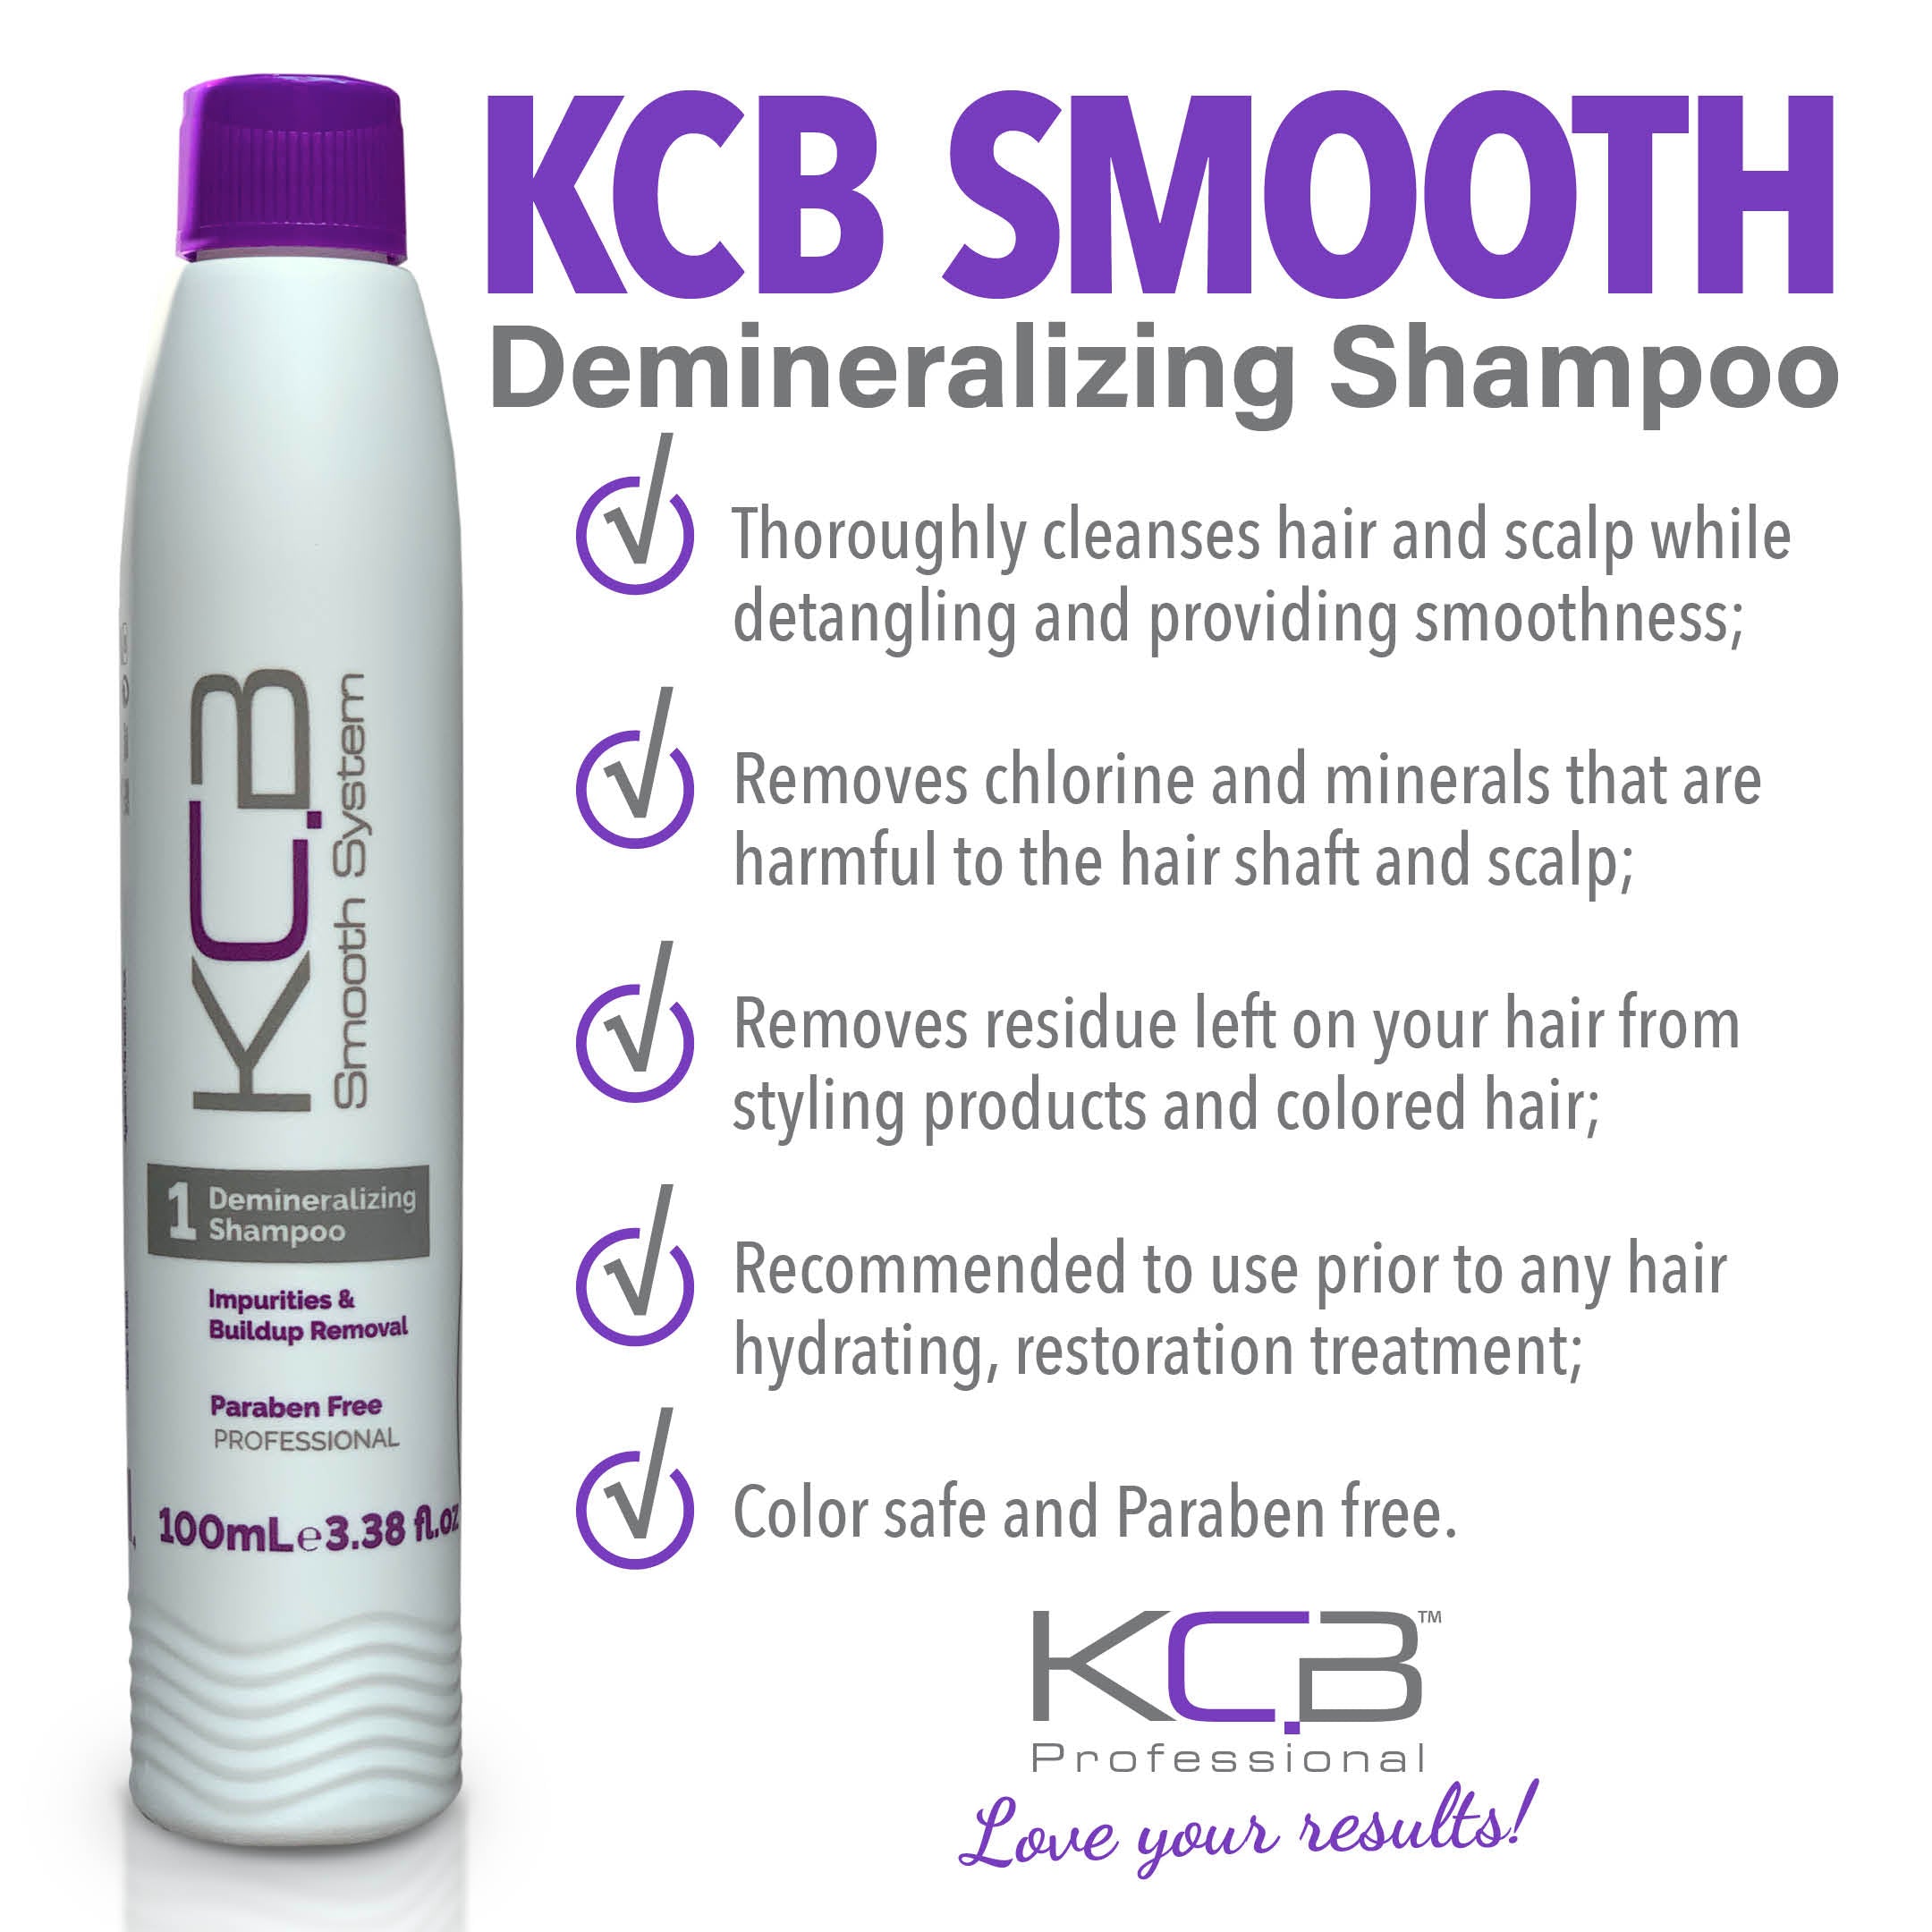 KCB Professional Smooth Repair Hair Mask for Smoothing, Deep Conditioning,  Bonding Hair Treatment, Frizz Control, All Hair Types, 17.63 oz / 500g.